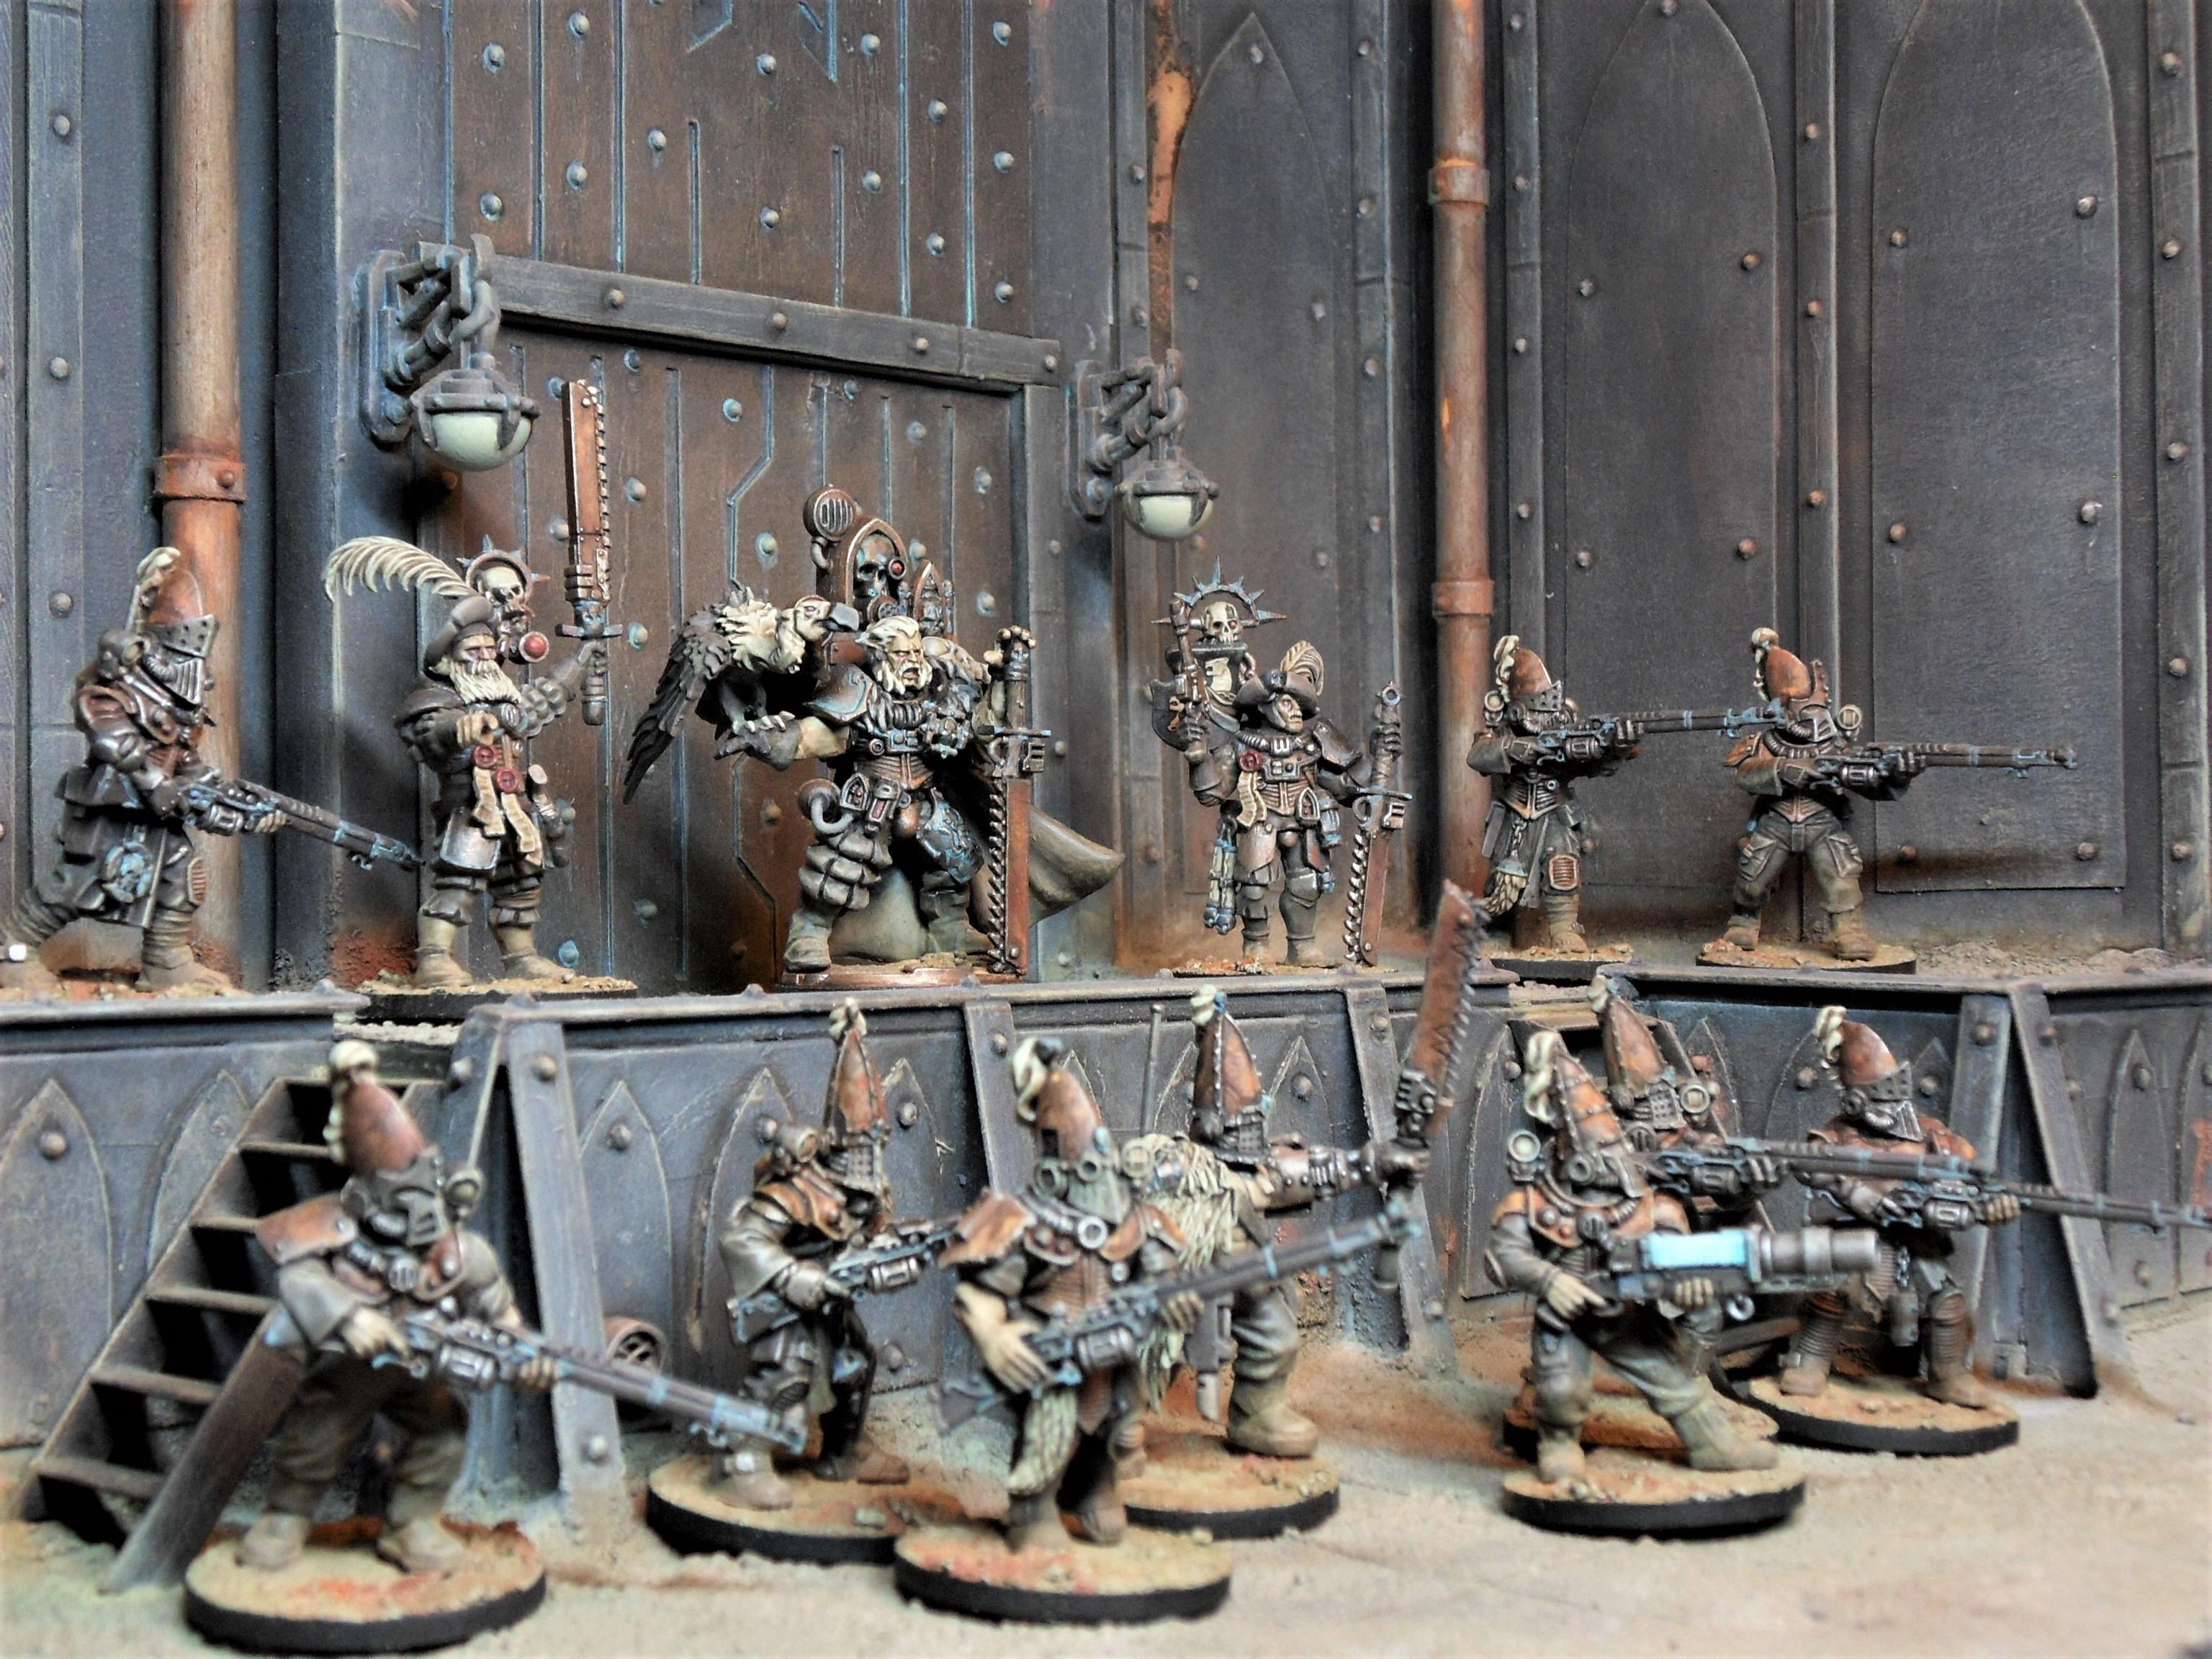 Astra Militarum, Dust, Imperial Guard, Infantry, Pigments, Rust, Warhammer 40,000, Weathered